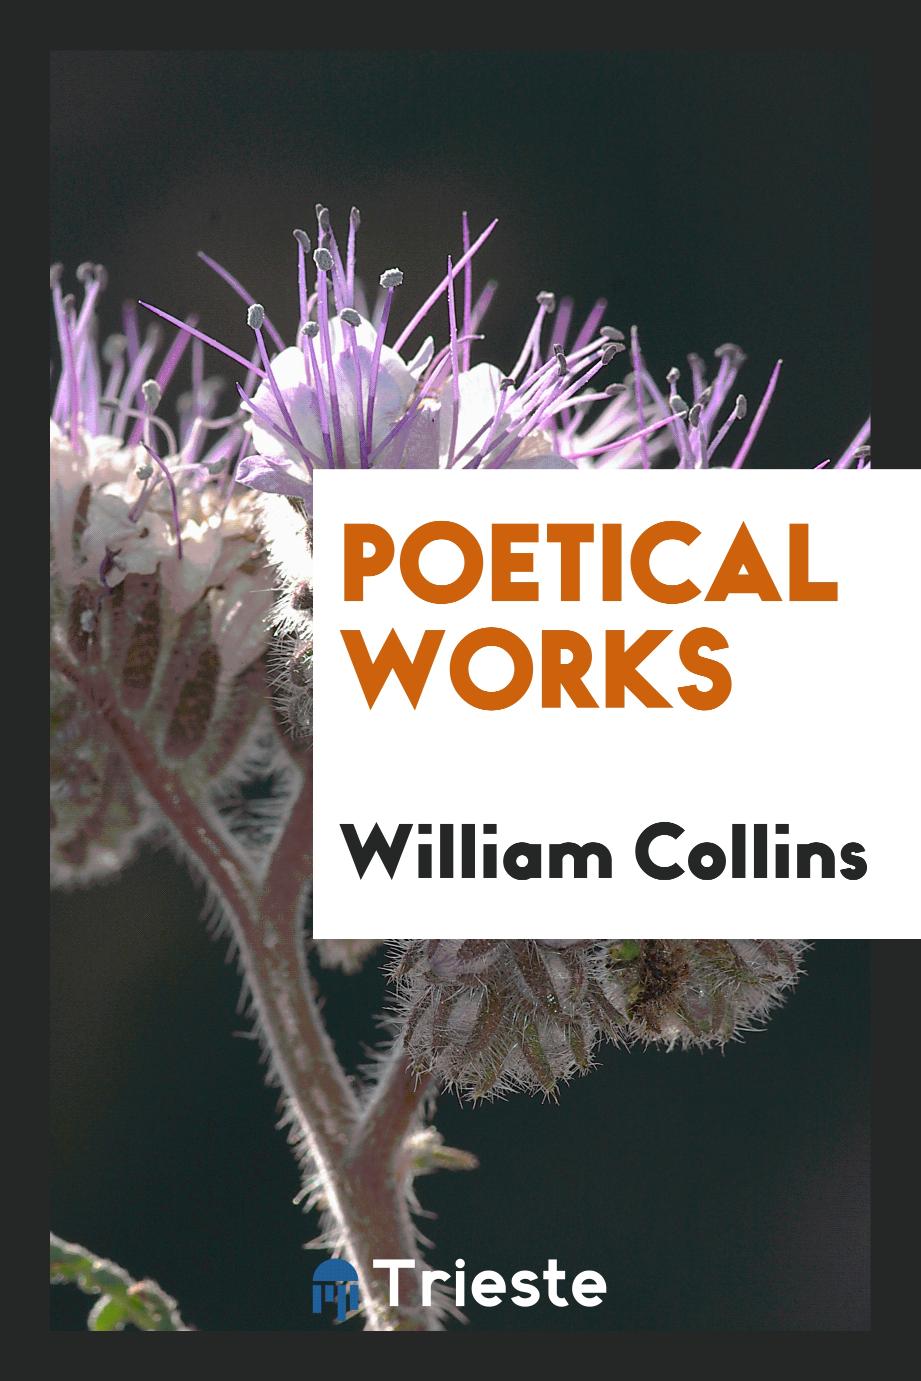 Poetical works